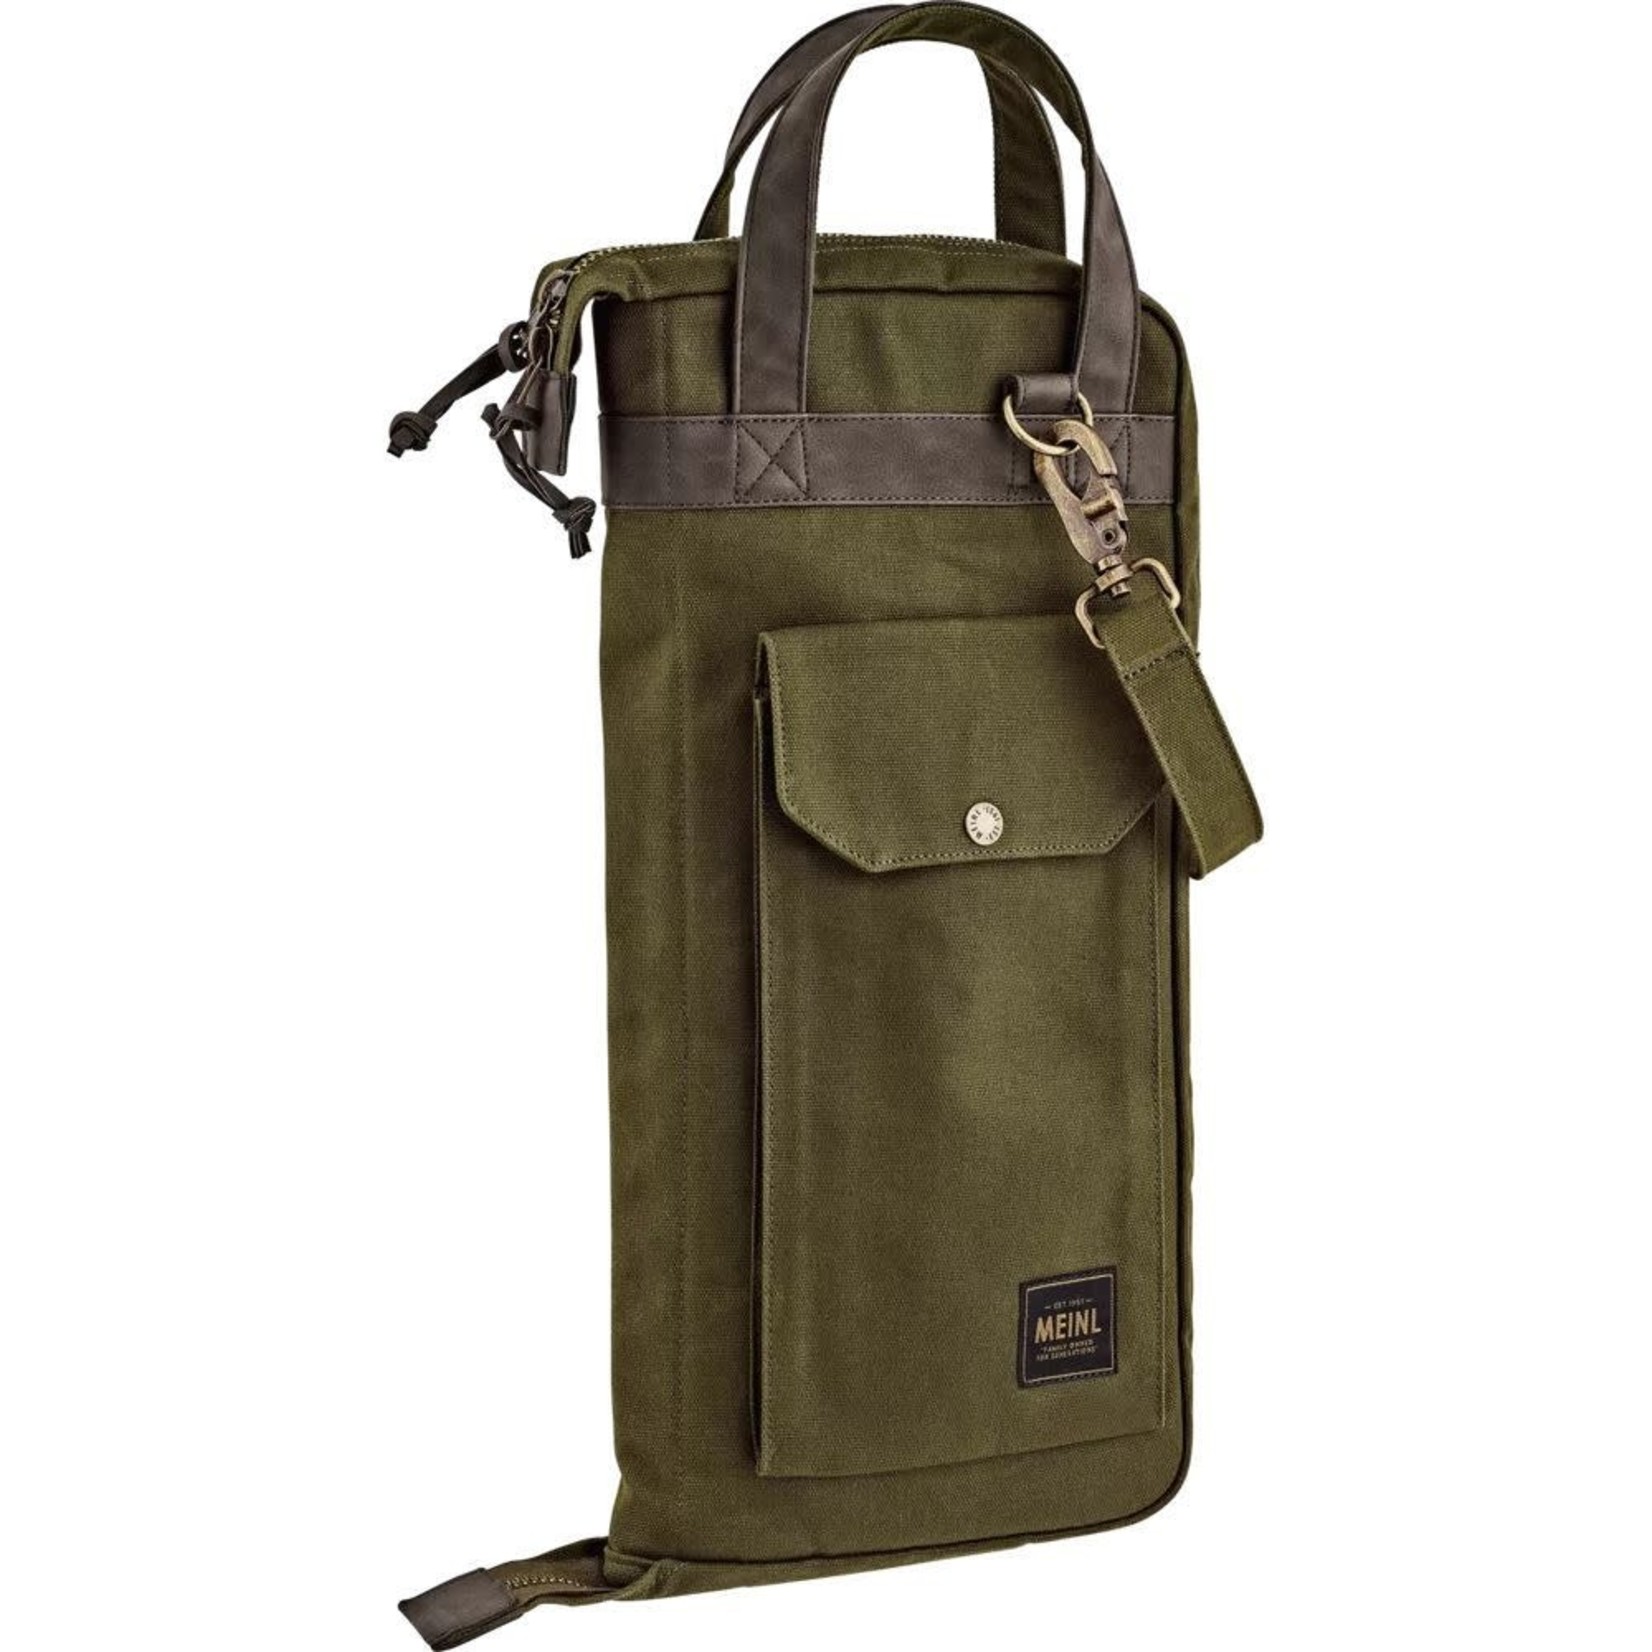 Meinl Meinl Waxed Canvas Collection Stick Bag Forest Green MWSGR